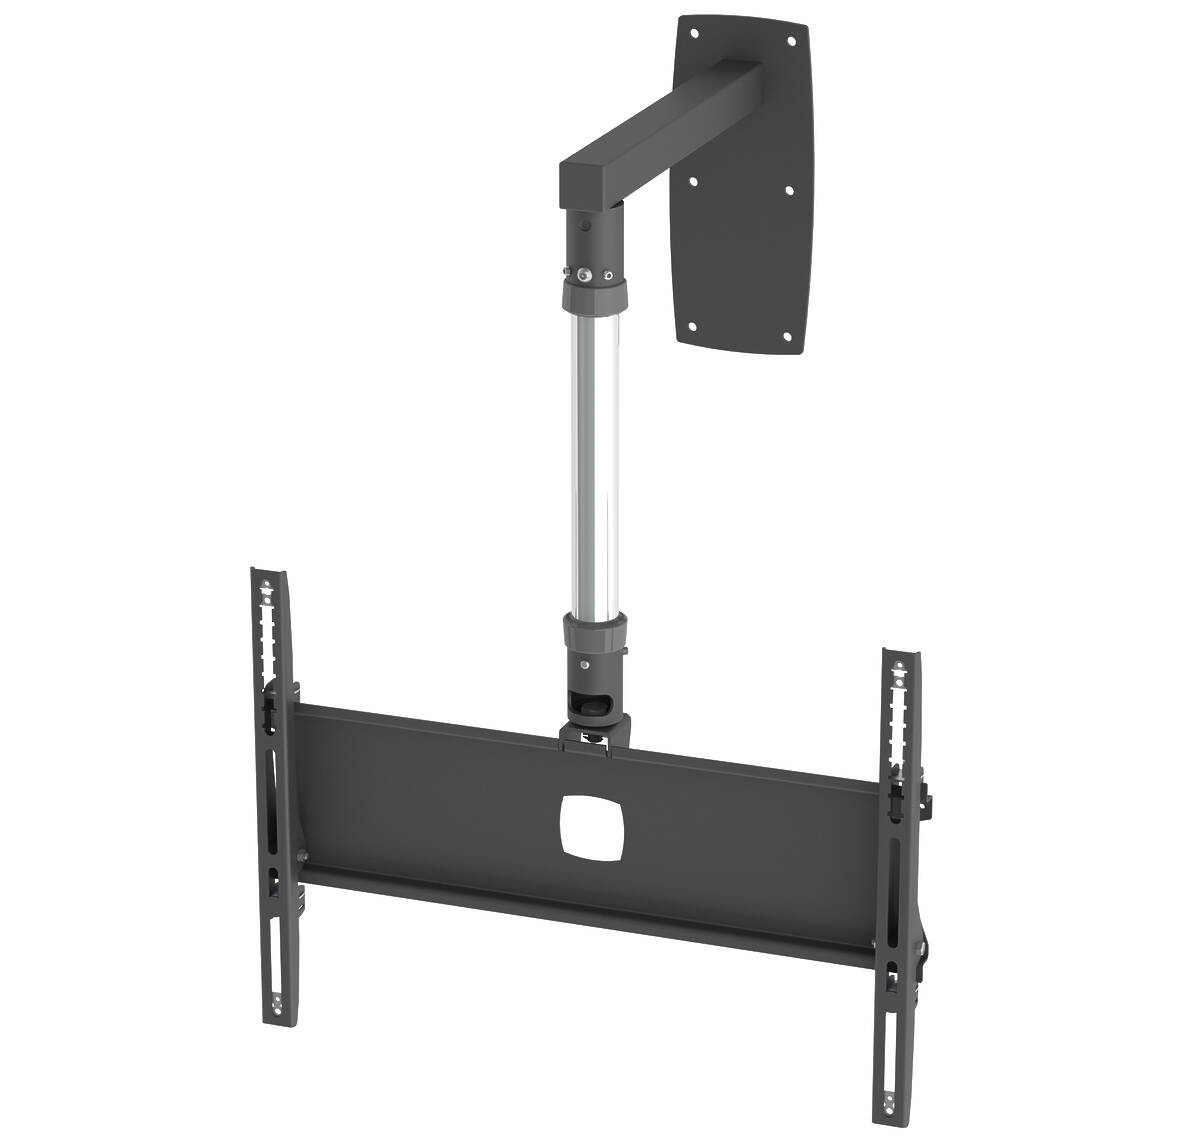 Unicol KP105WB LCD/LED Monitor and Commercial TV wall arm mount for 33-70" screens, 50cm drop product image. Click to enlarge.